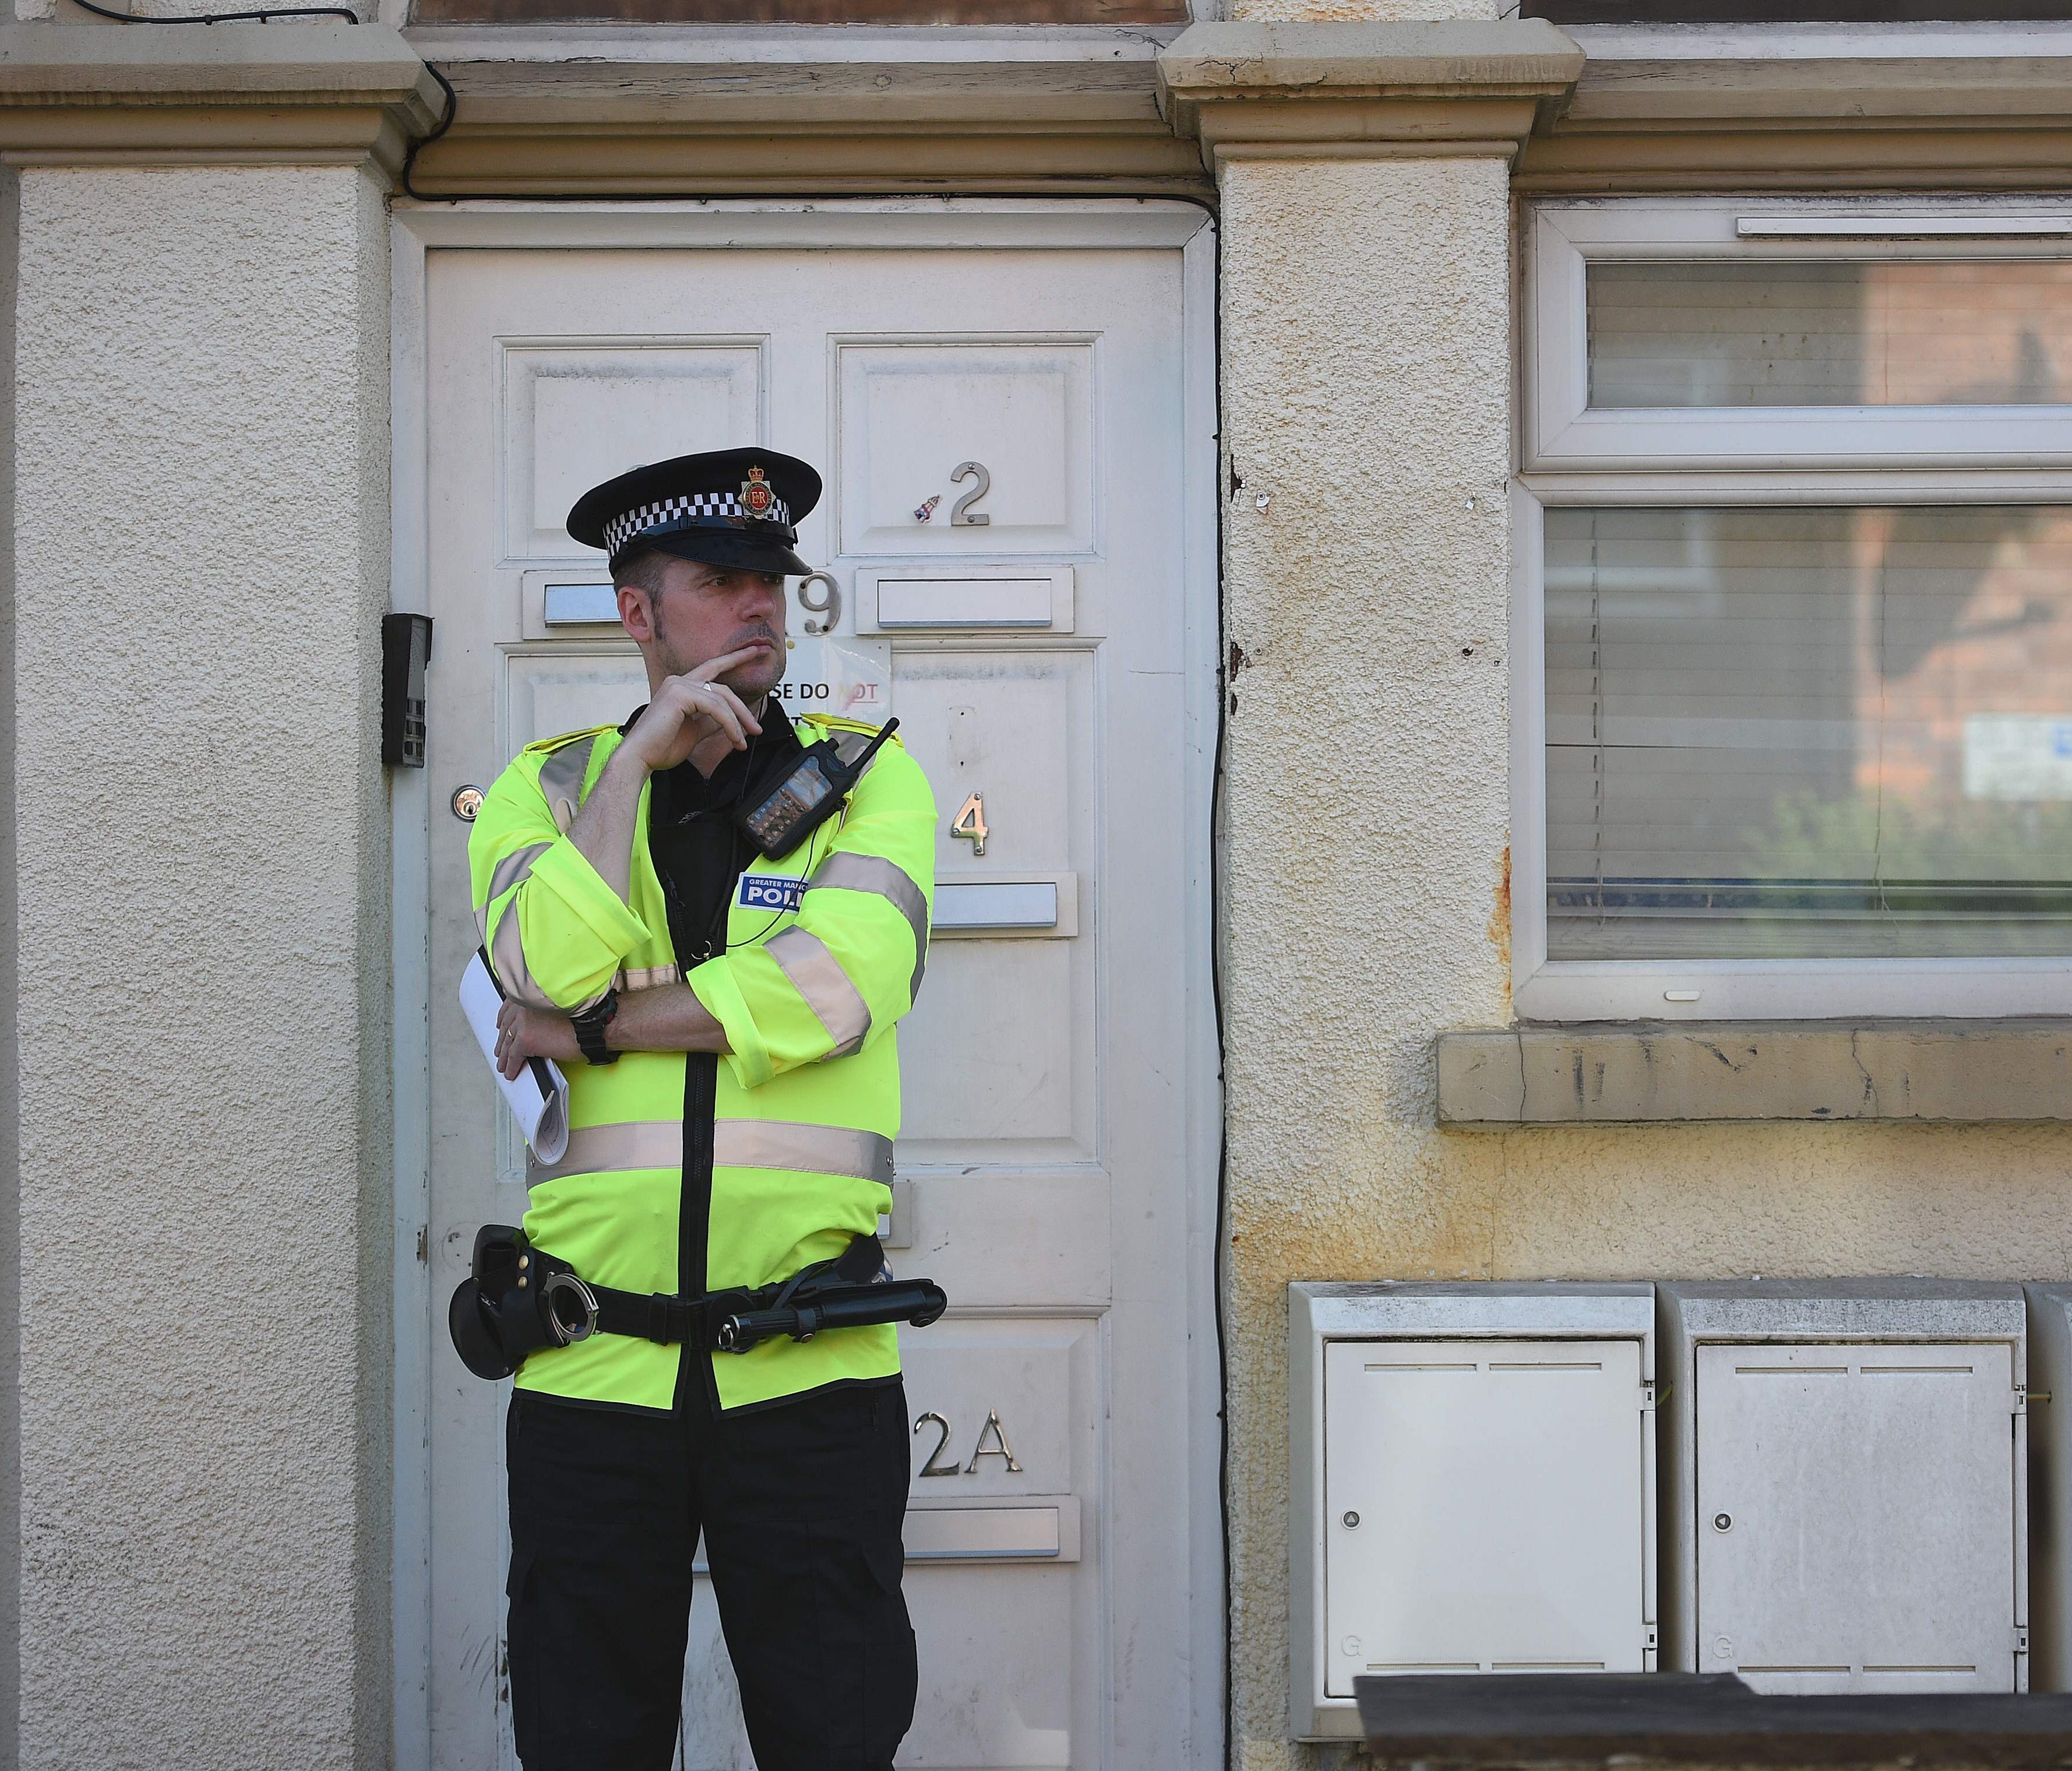 A police officer stands on duty outside a residential property on Egerton Crescent in Withington, Manchester, on May 25, 2017, as their investigations continue into the May 22 terror attack at the Manchester Arena.